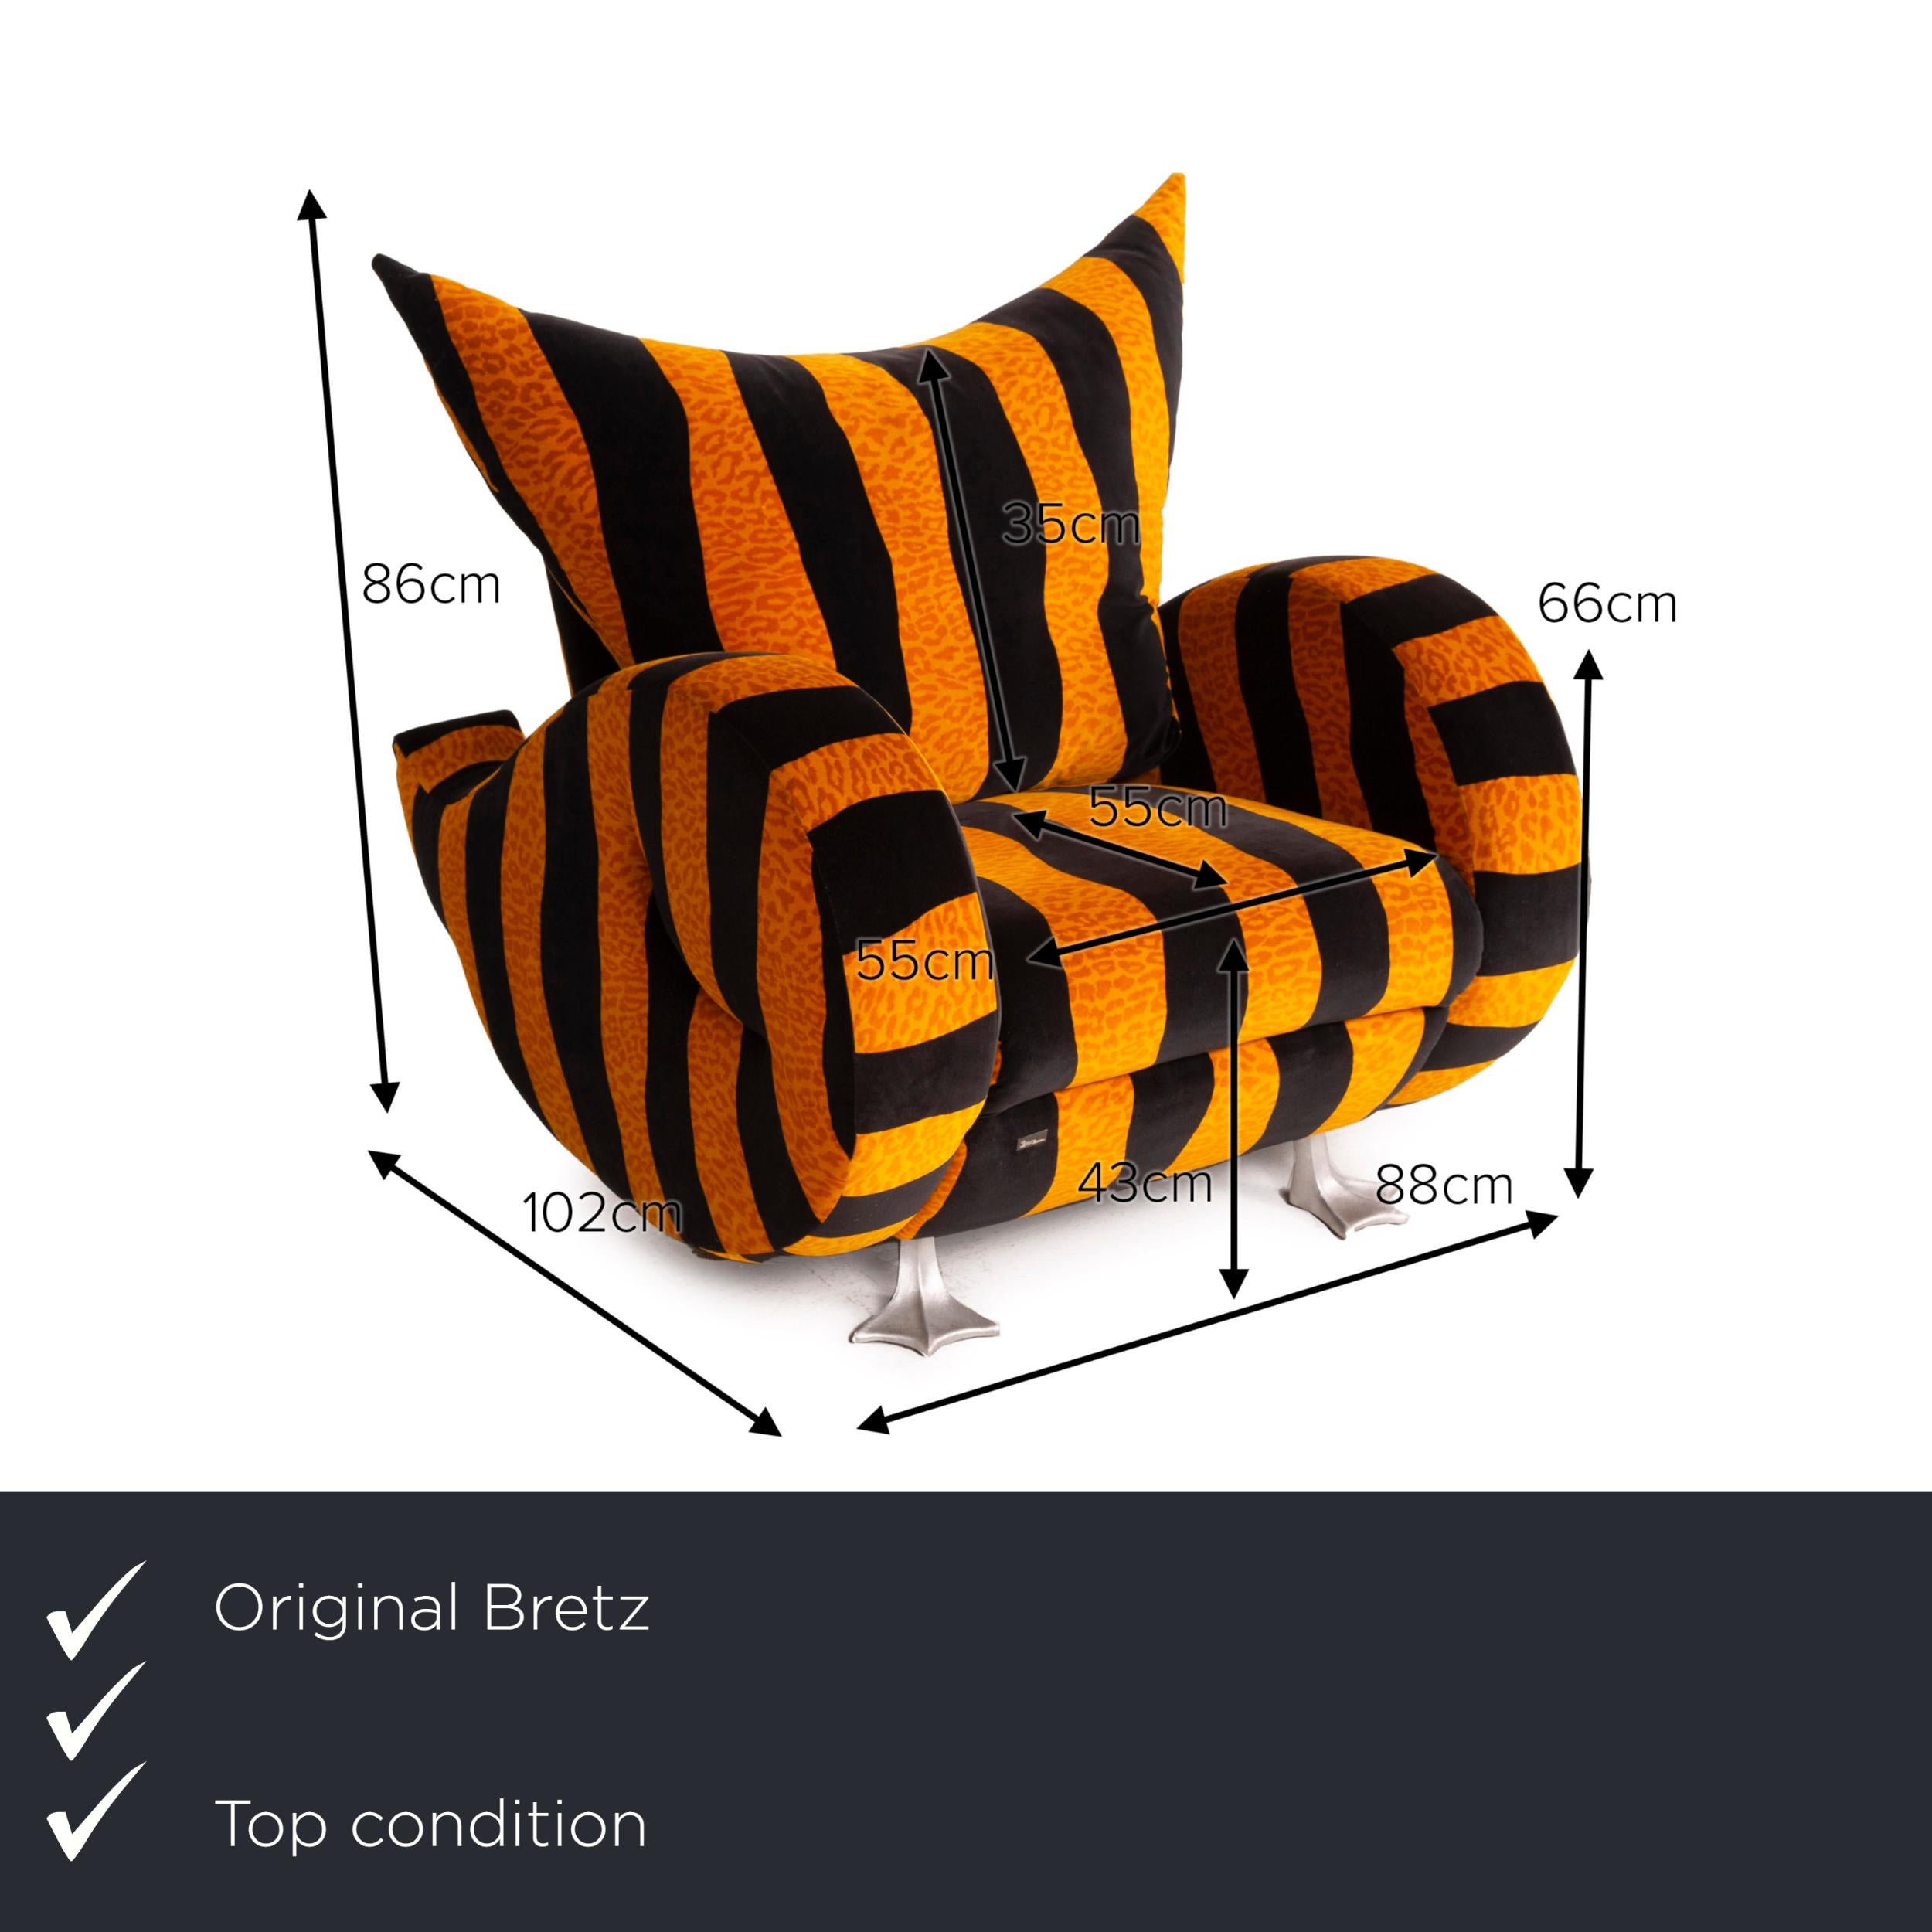 We present to you a Bretz Knastente fabric armchair yellow black tiger pattern.
  
 

 Product measurements in centimeters:
 

 depth: 102
 width: 88
 height: 86
 seat height: 43
 rest height: 66
 seat depth: 49
 seat width: 55
 back